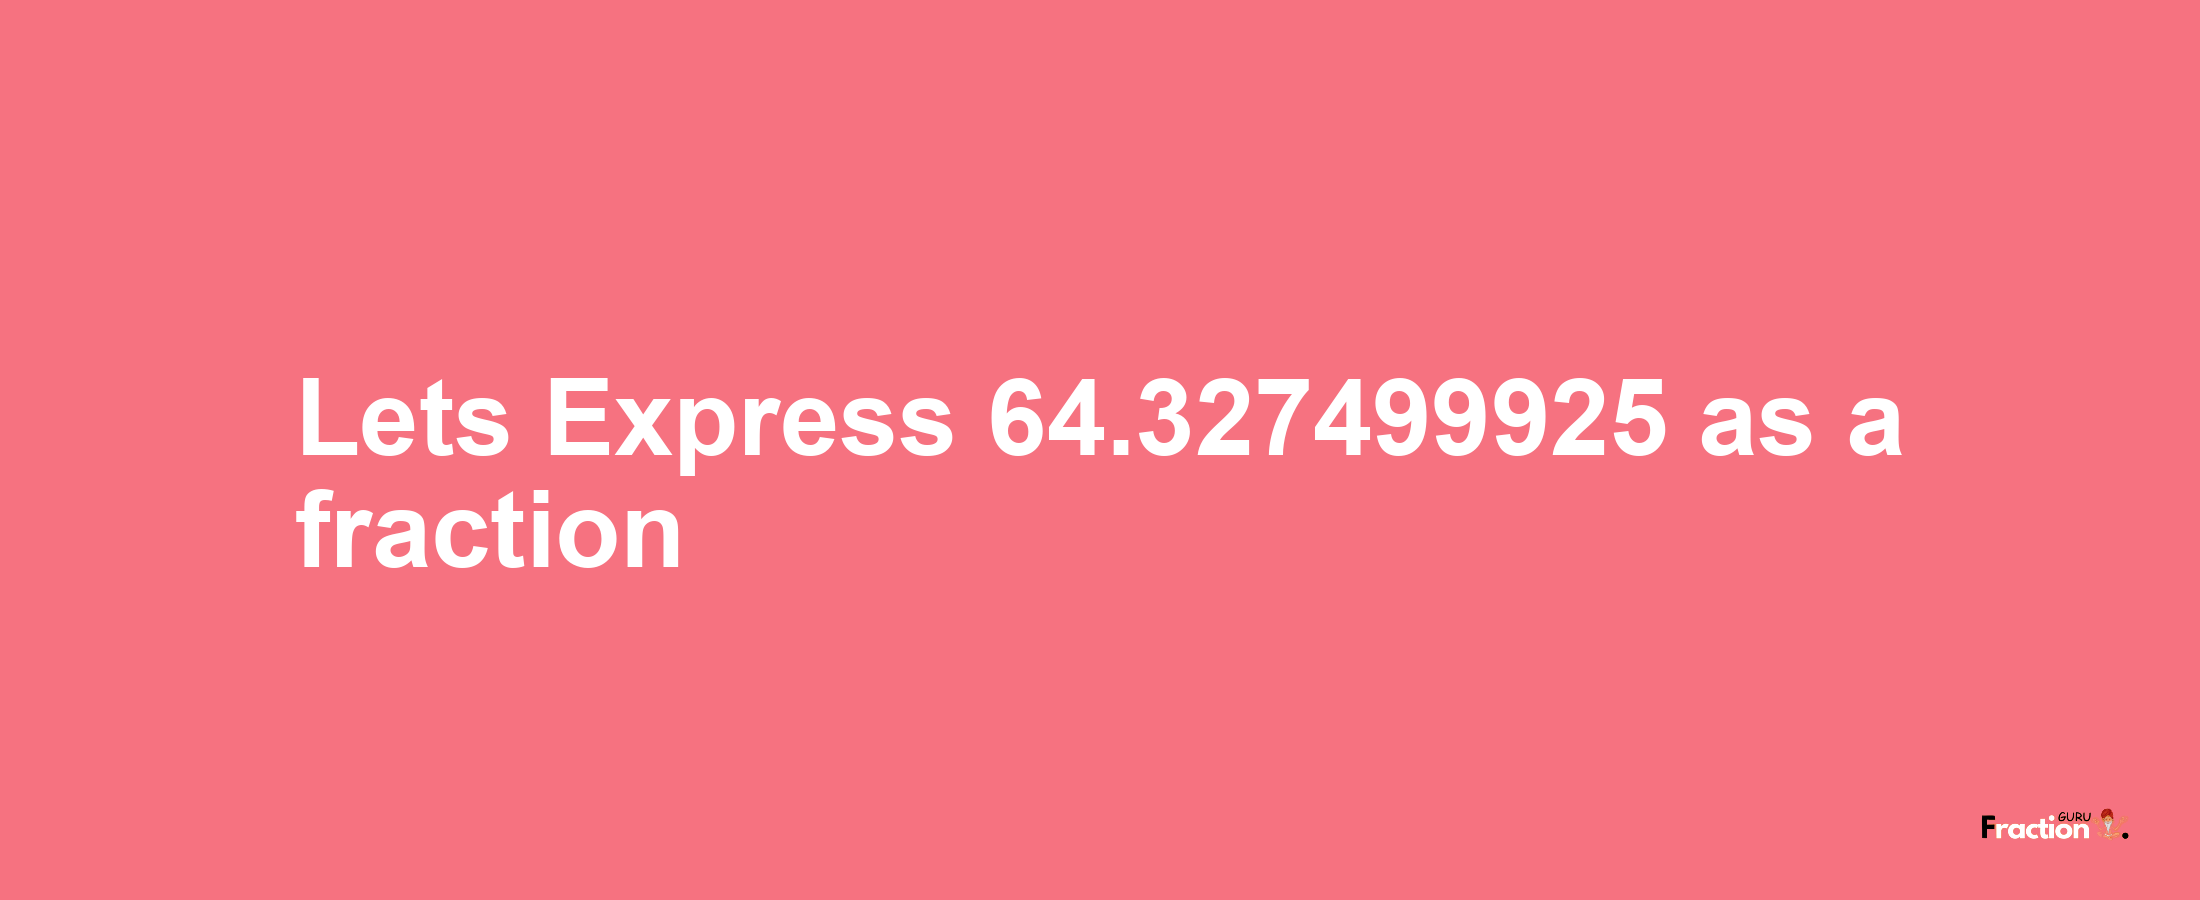 Lets Express 64.327499925 as afraction